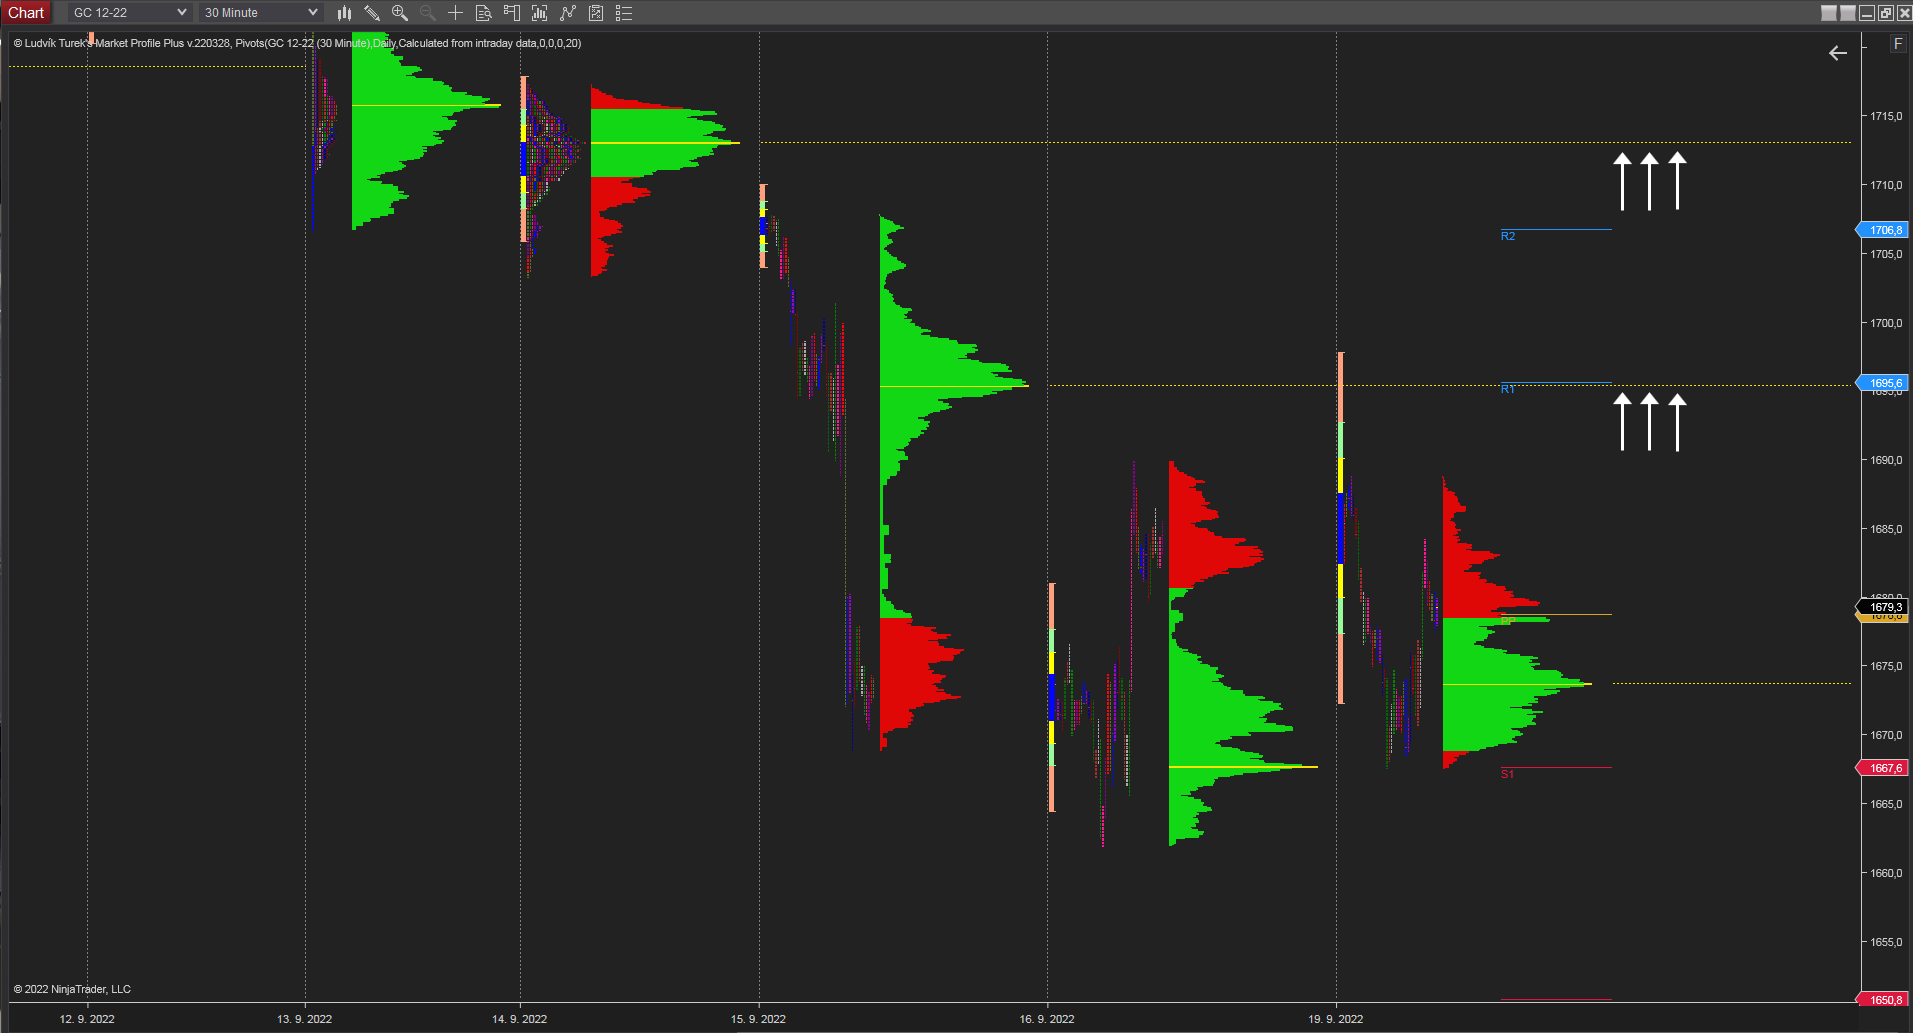 30 minutes chart of GC (Gold Futures), Daily Market Profile's levels of interest. Source: Author's analysis